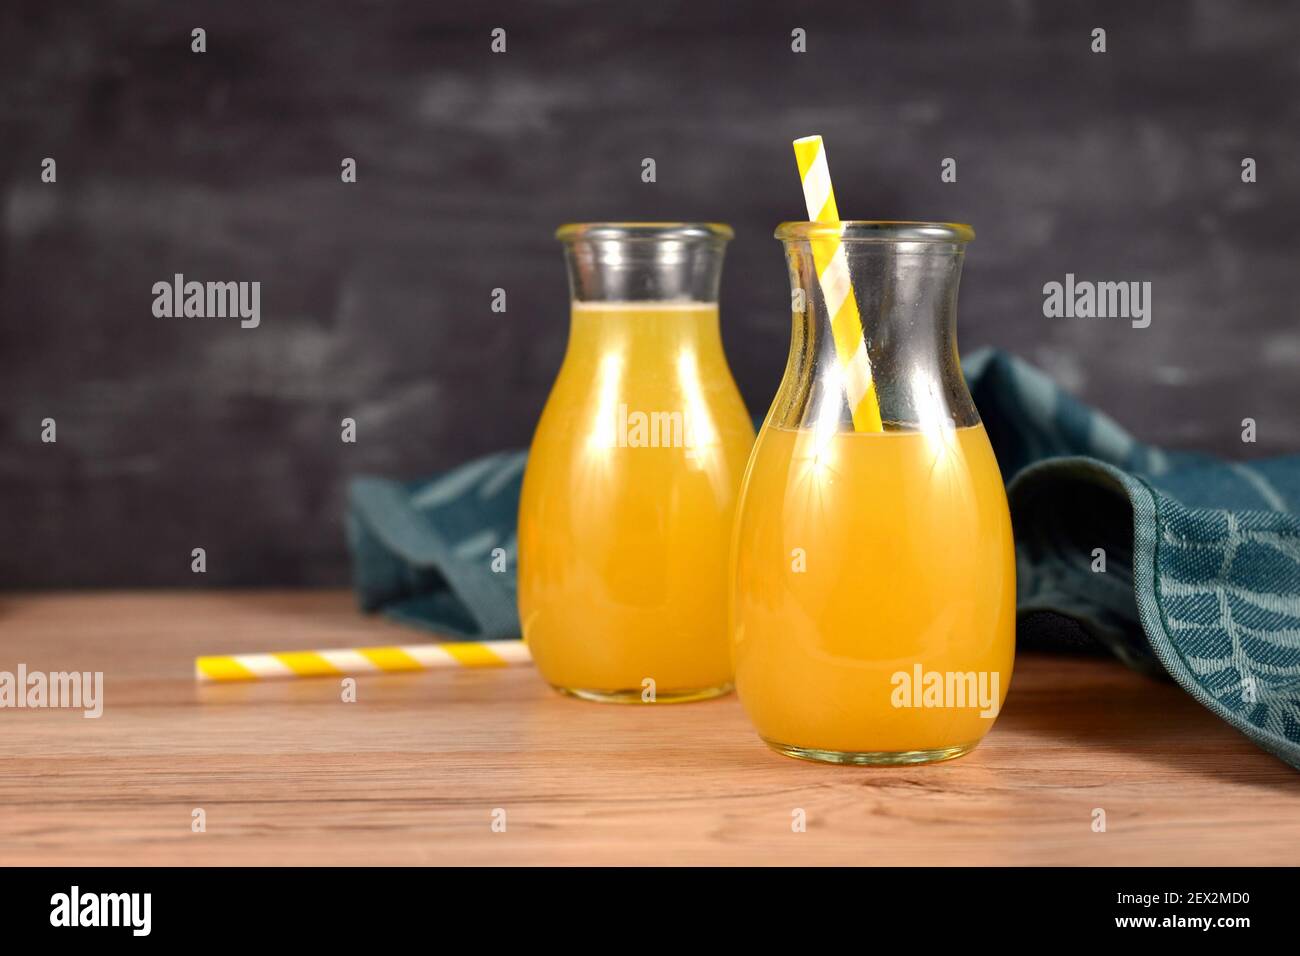 Homemade lemonade made from citrus fruits in small bottle jars with drinking straws Stock Photo